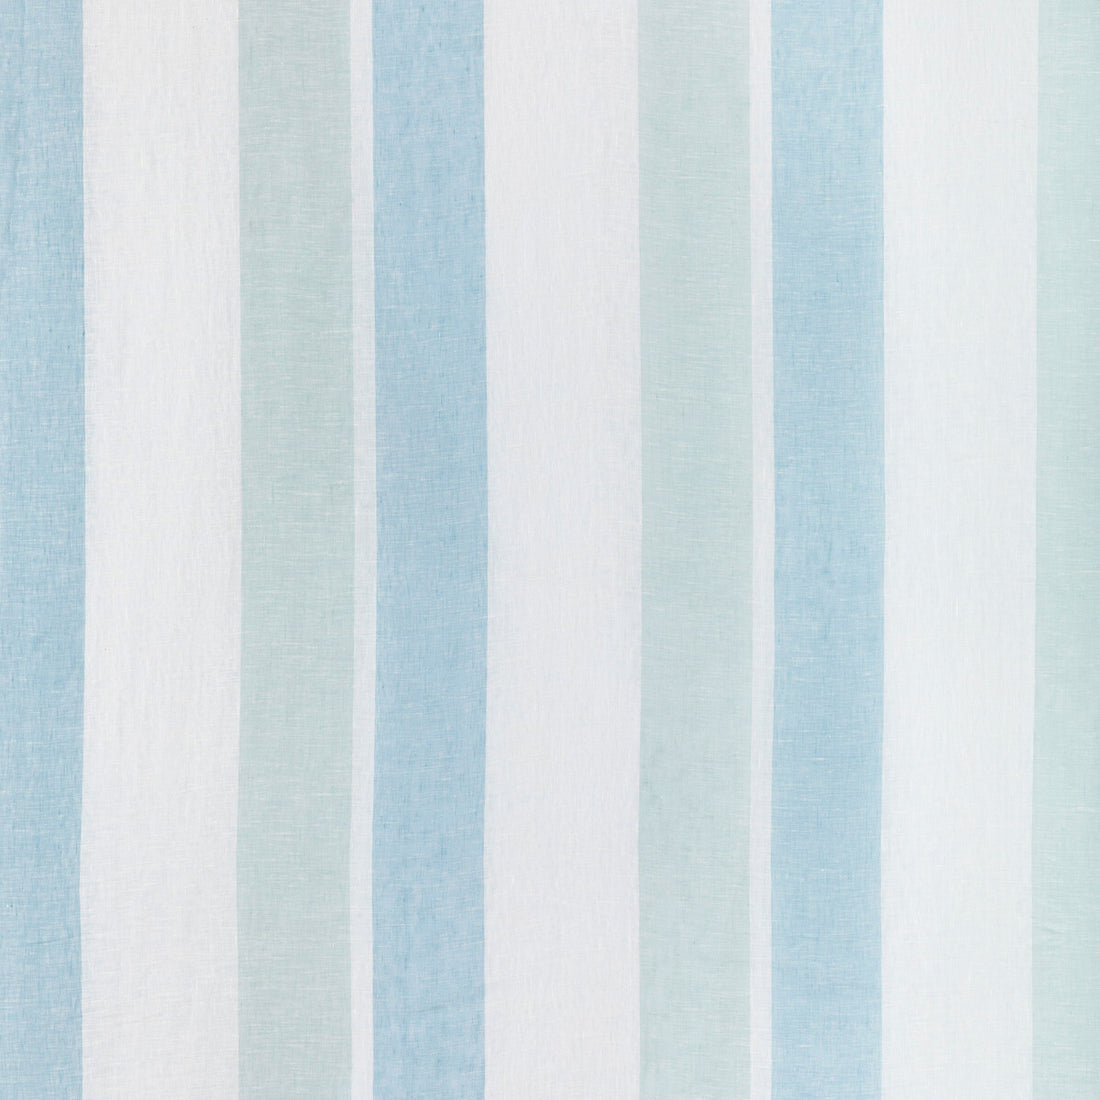 Del Mar Sheer fabric in blue/aqua color - pattern 2021119.1315.0 - by Lee Jofa in the Summerland collection